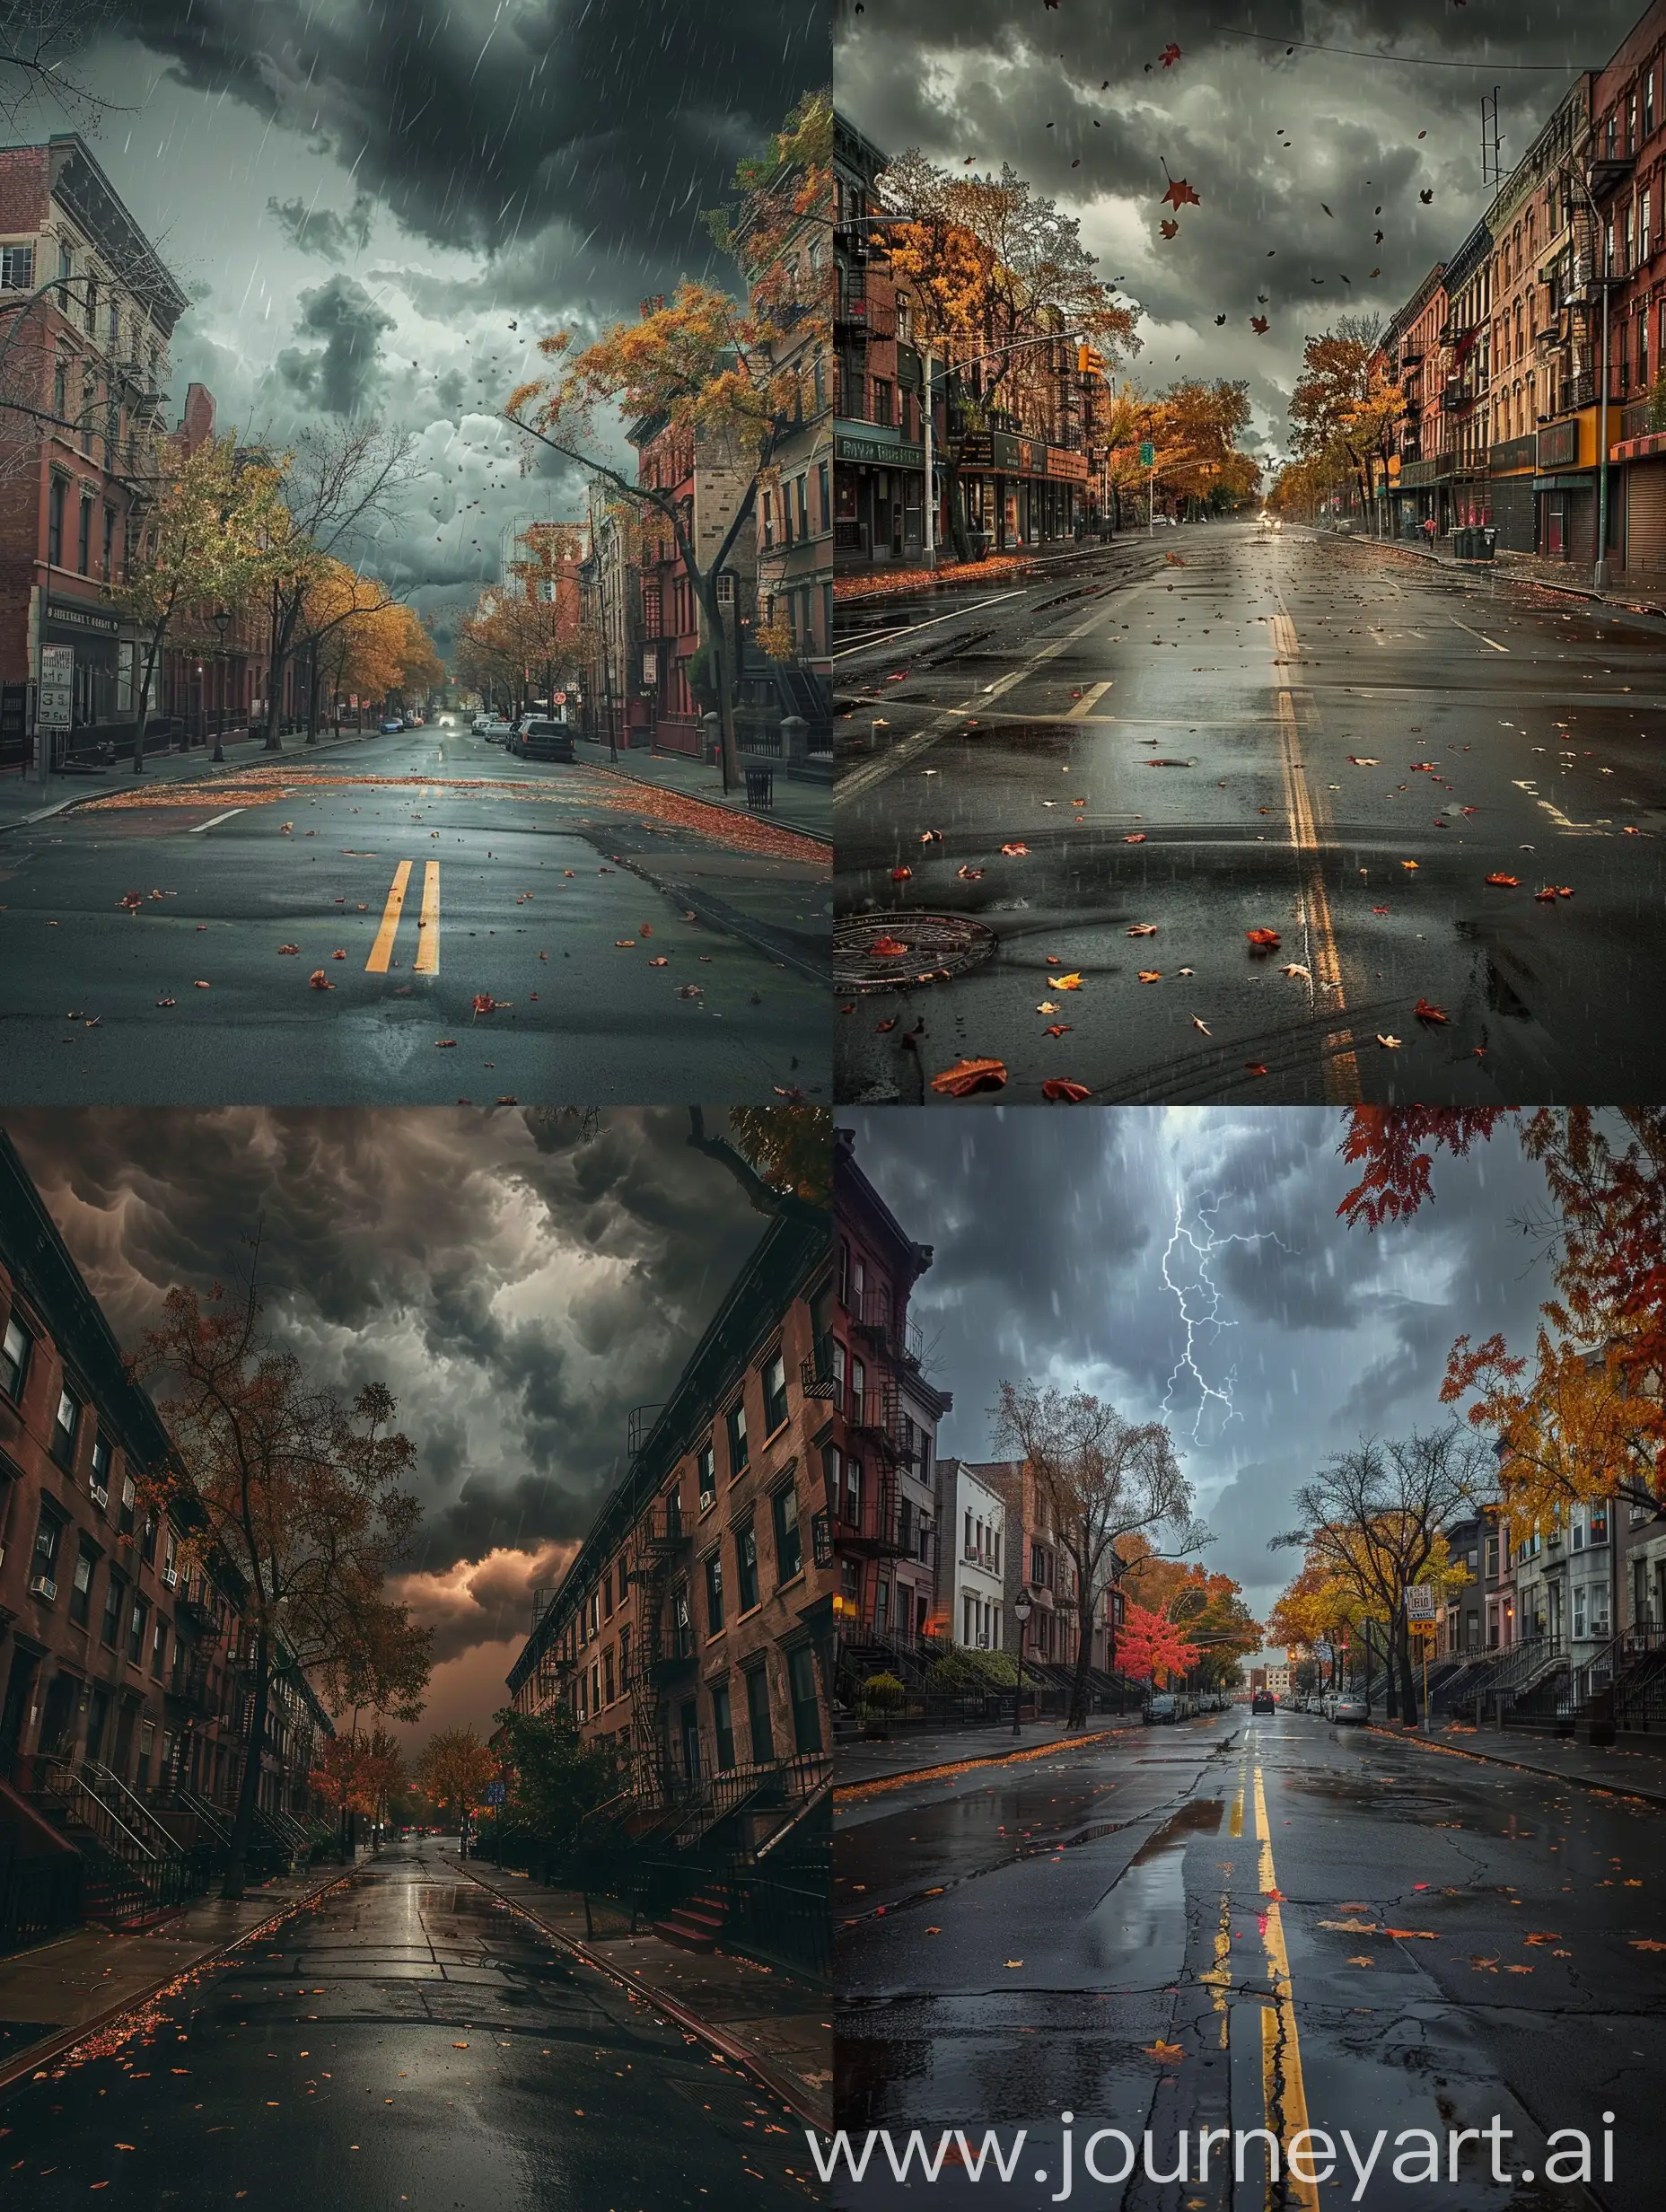 Surreal-Empty-Streets-of-Harlem-During-Fall-Thunderstorm